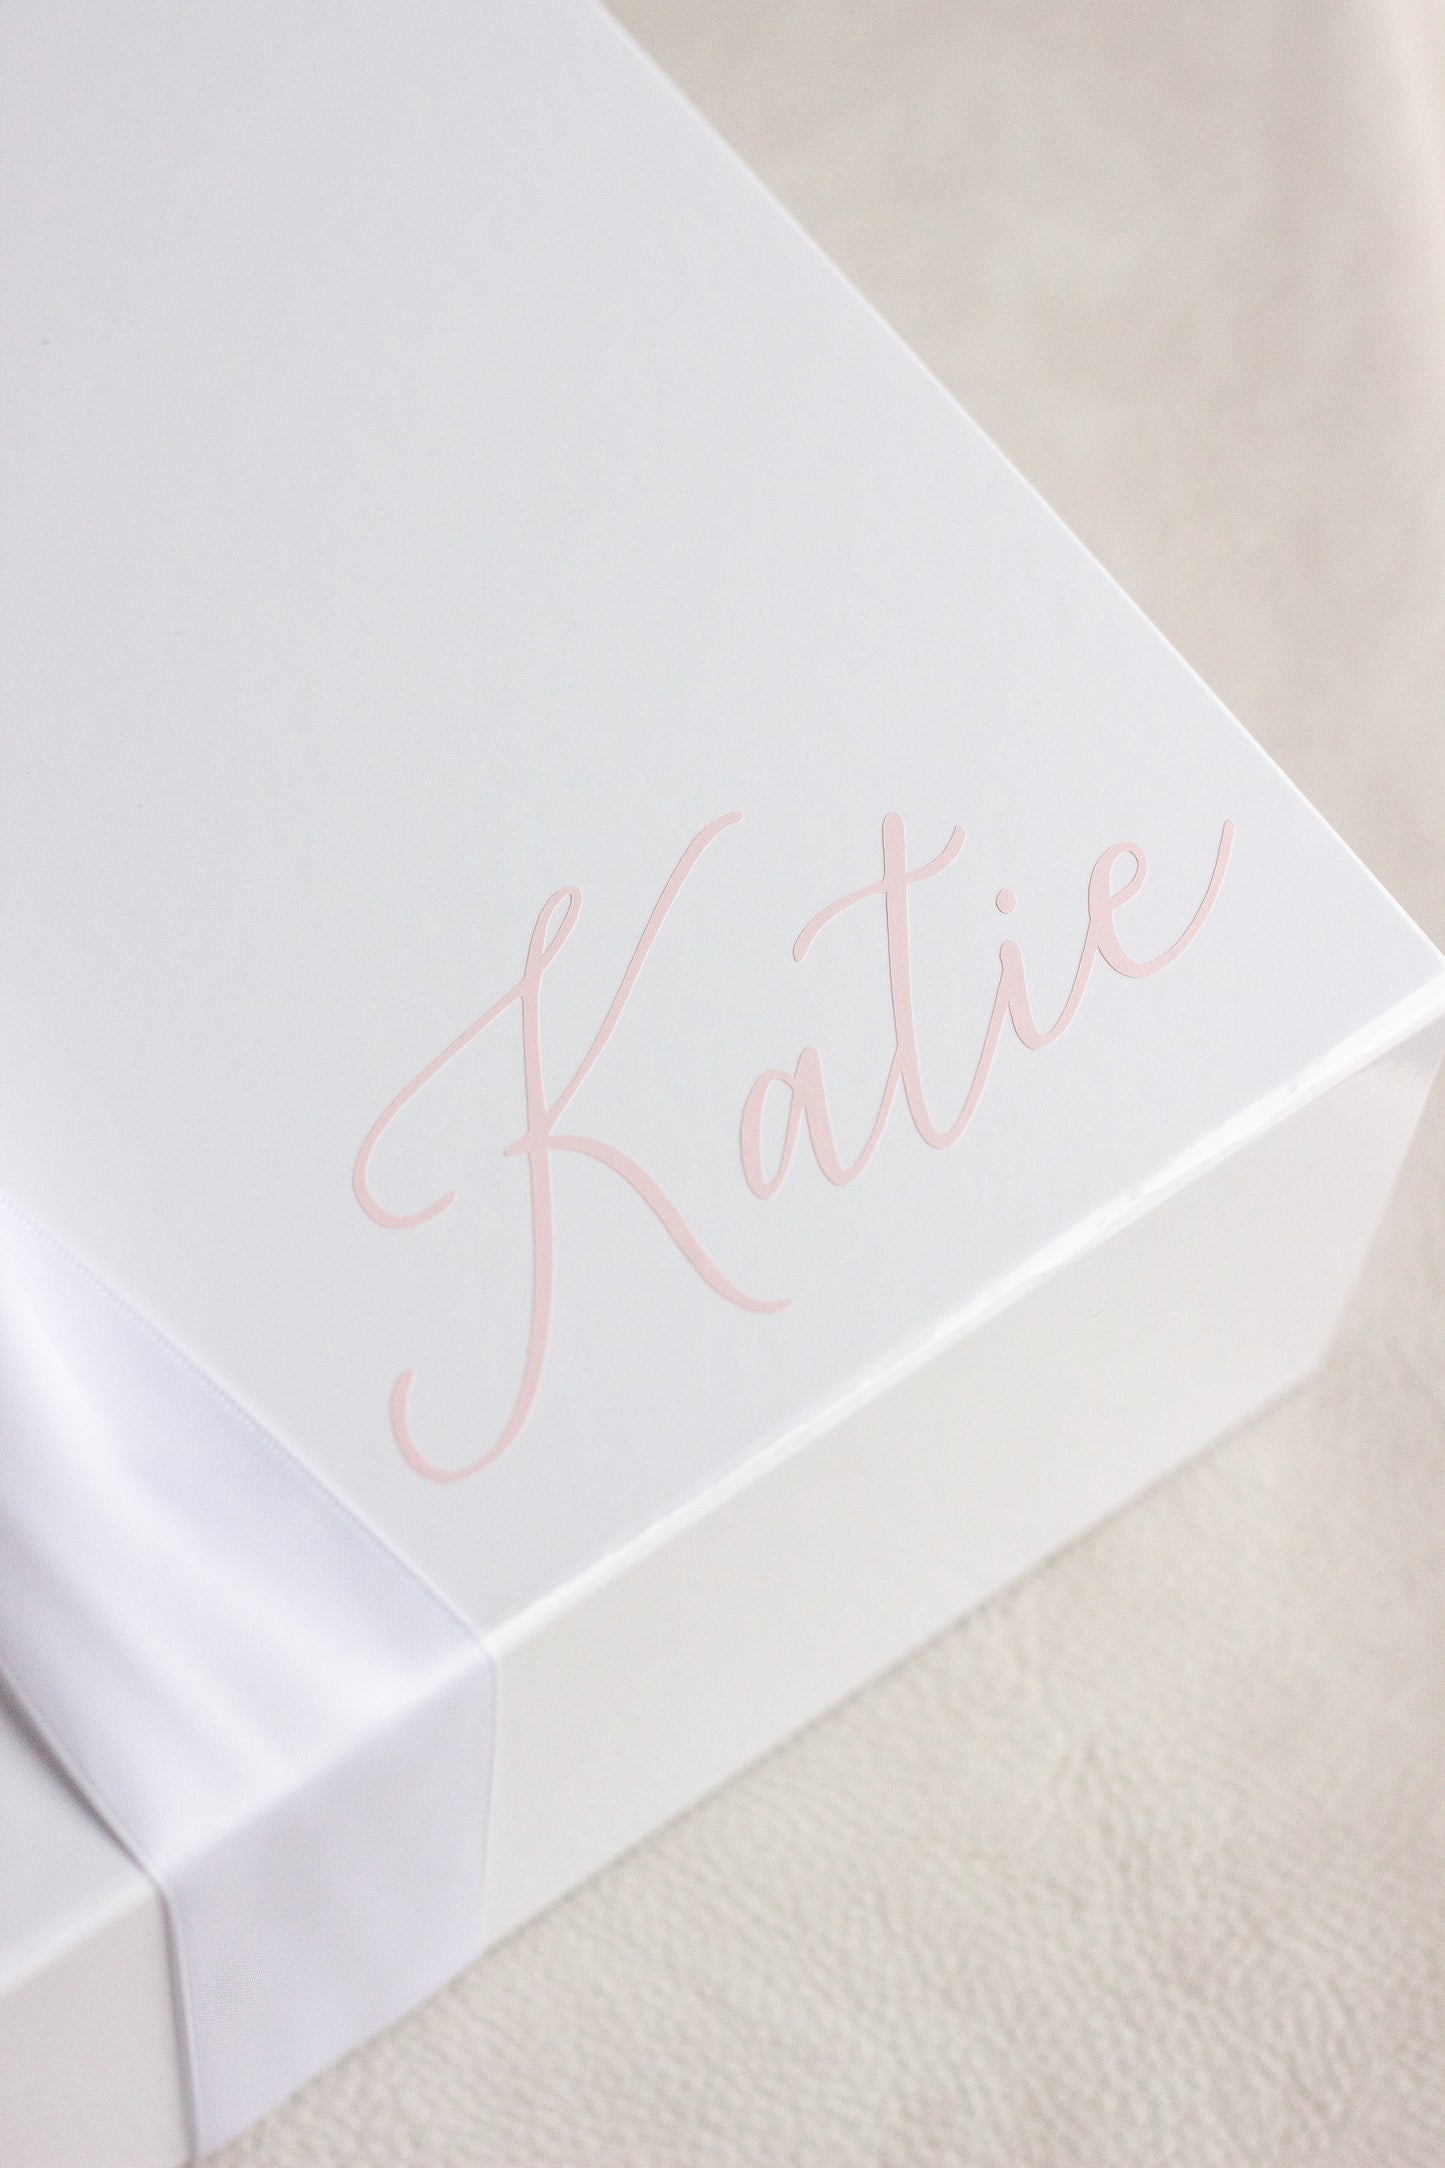 Personalized Gift Boxes - White Magnetic Gift Box